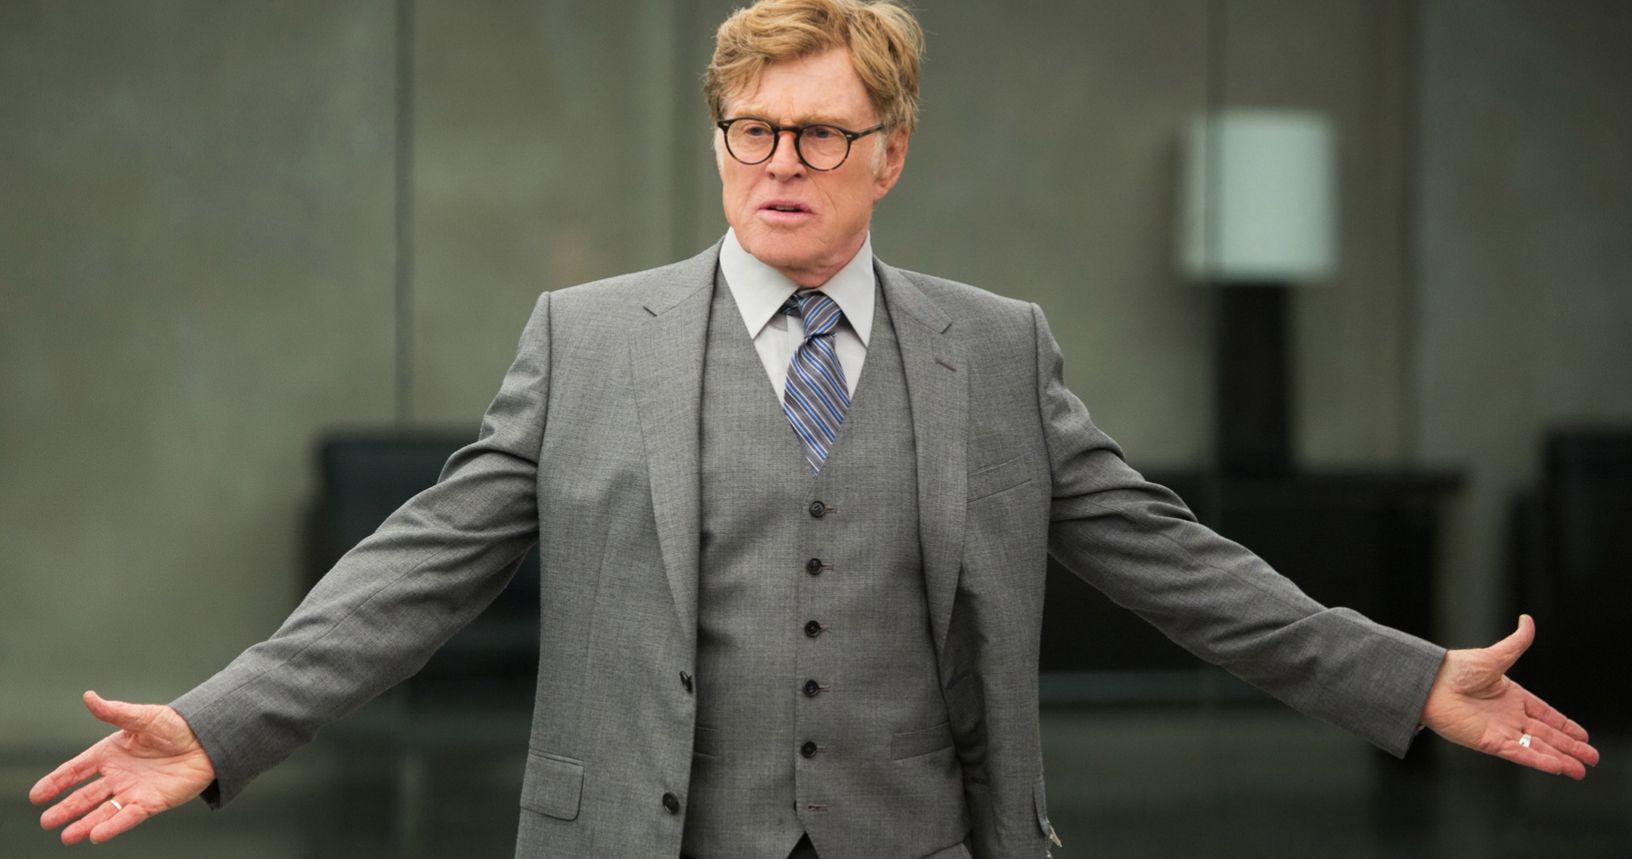 Watchmen Elects Robert Redford as President of the United States